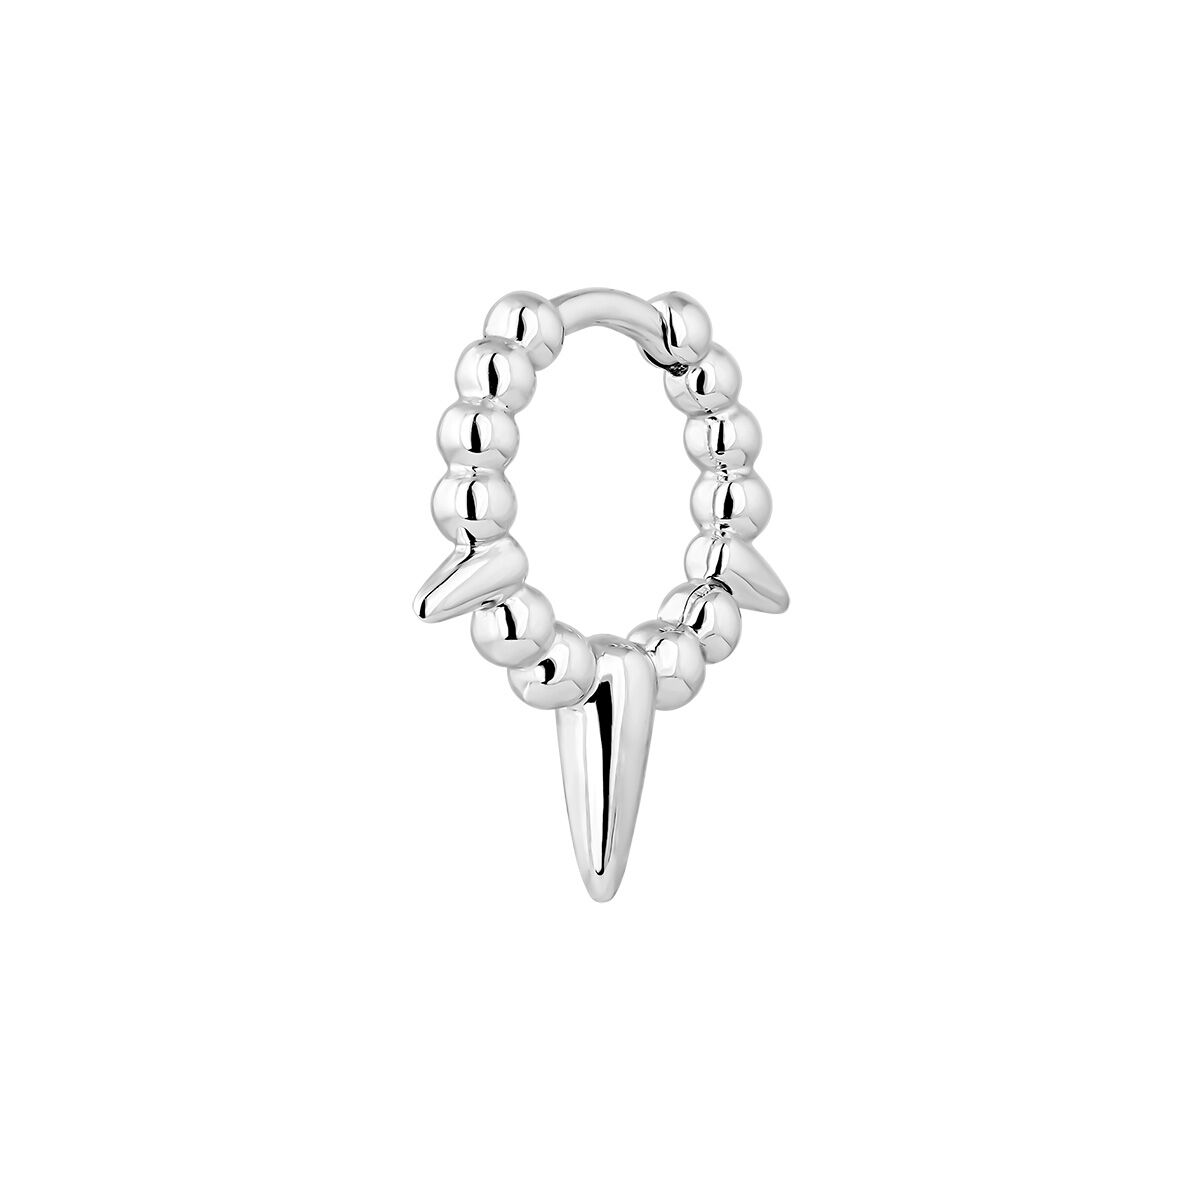 Ball hoop piercing in 9k white gold with spikes, J05169-01-H, hi-res